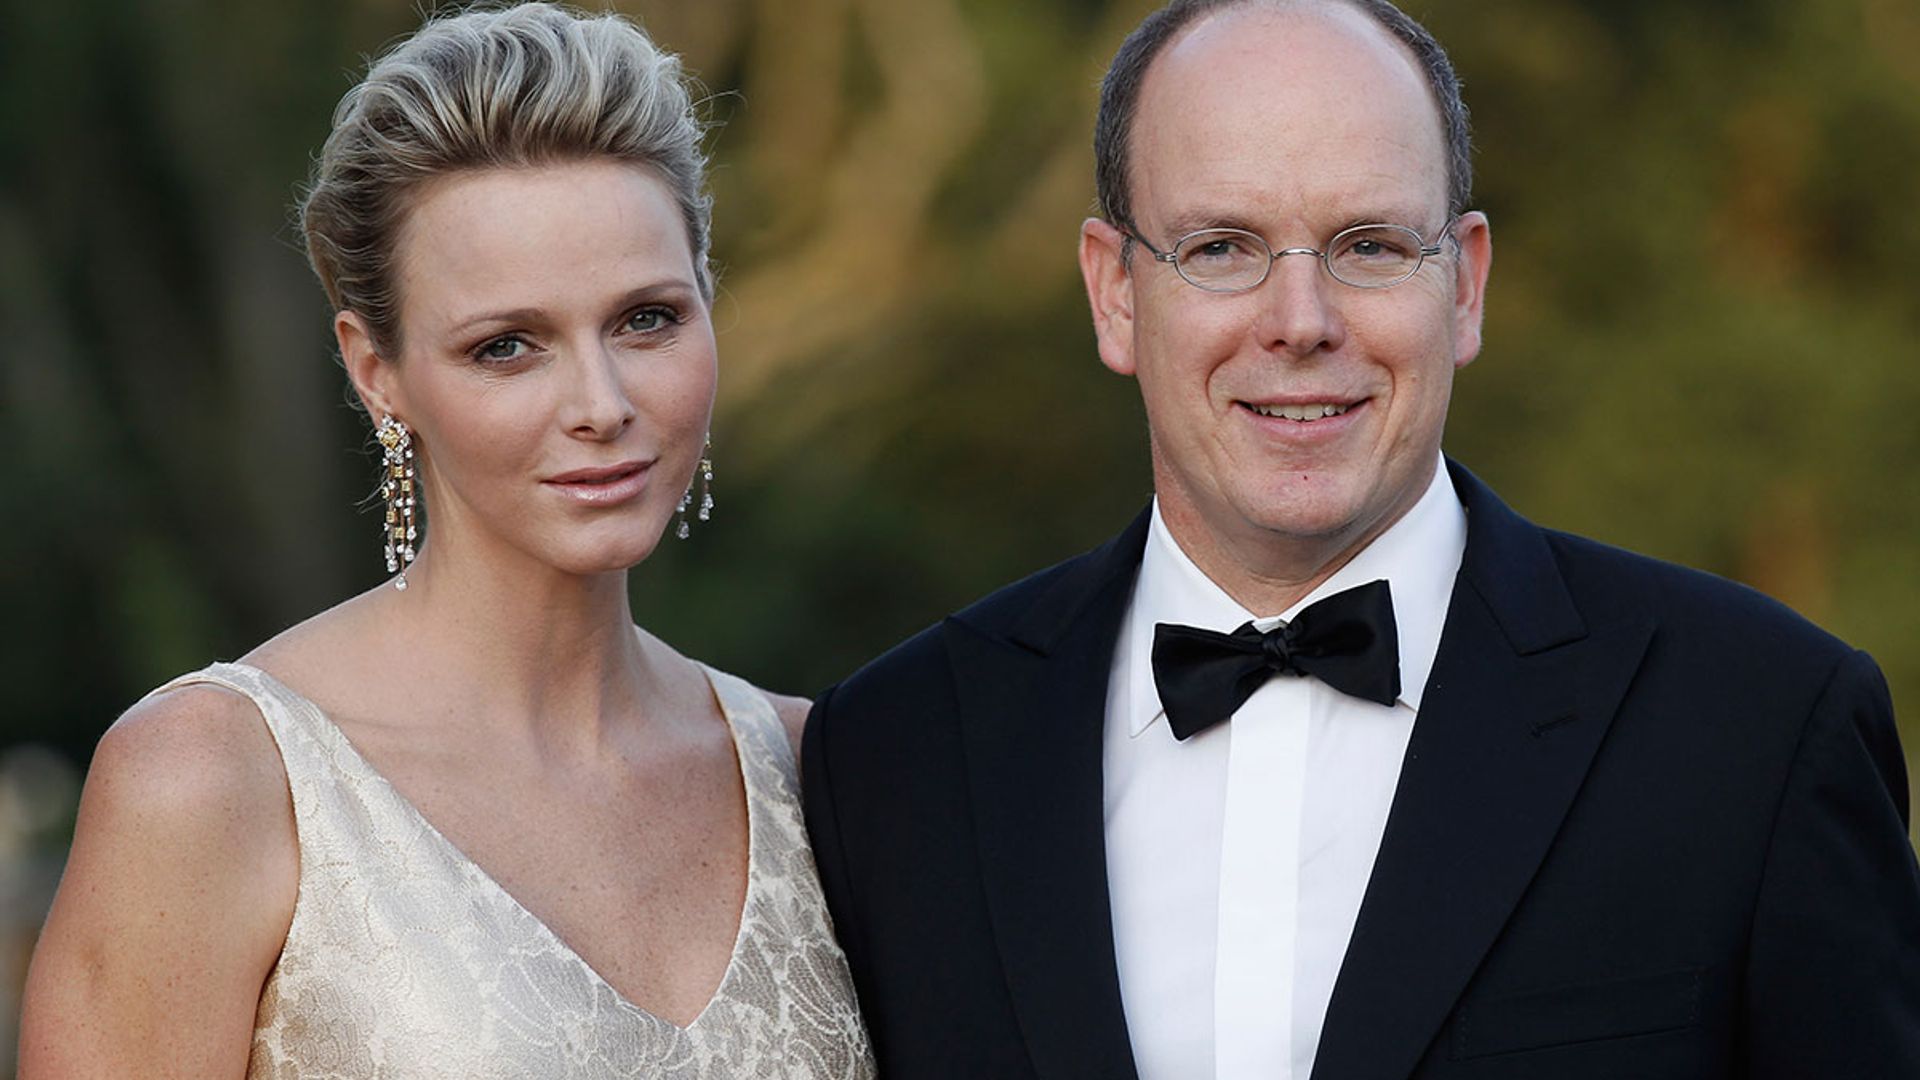 Princess Charlene and Prince Albert celebrate special relationship milestone following 'trying time'